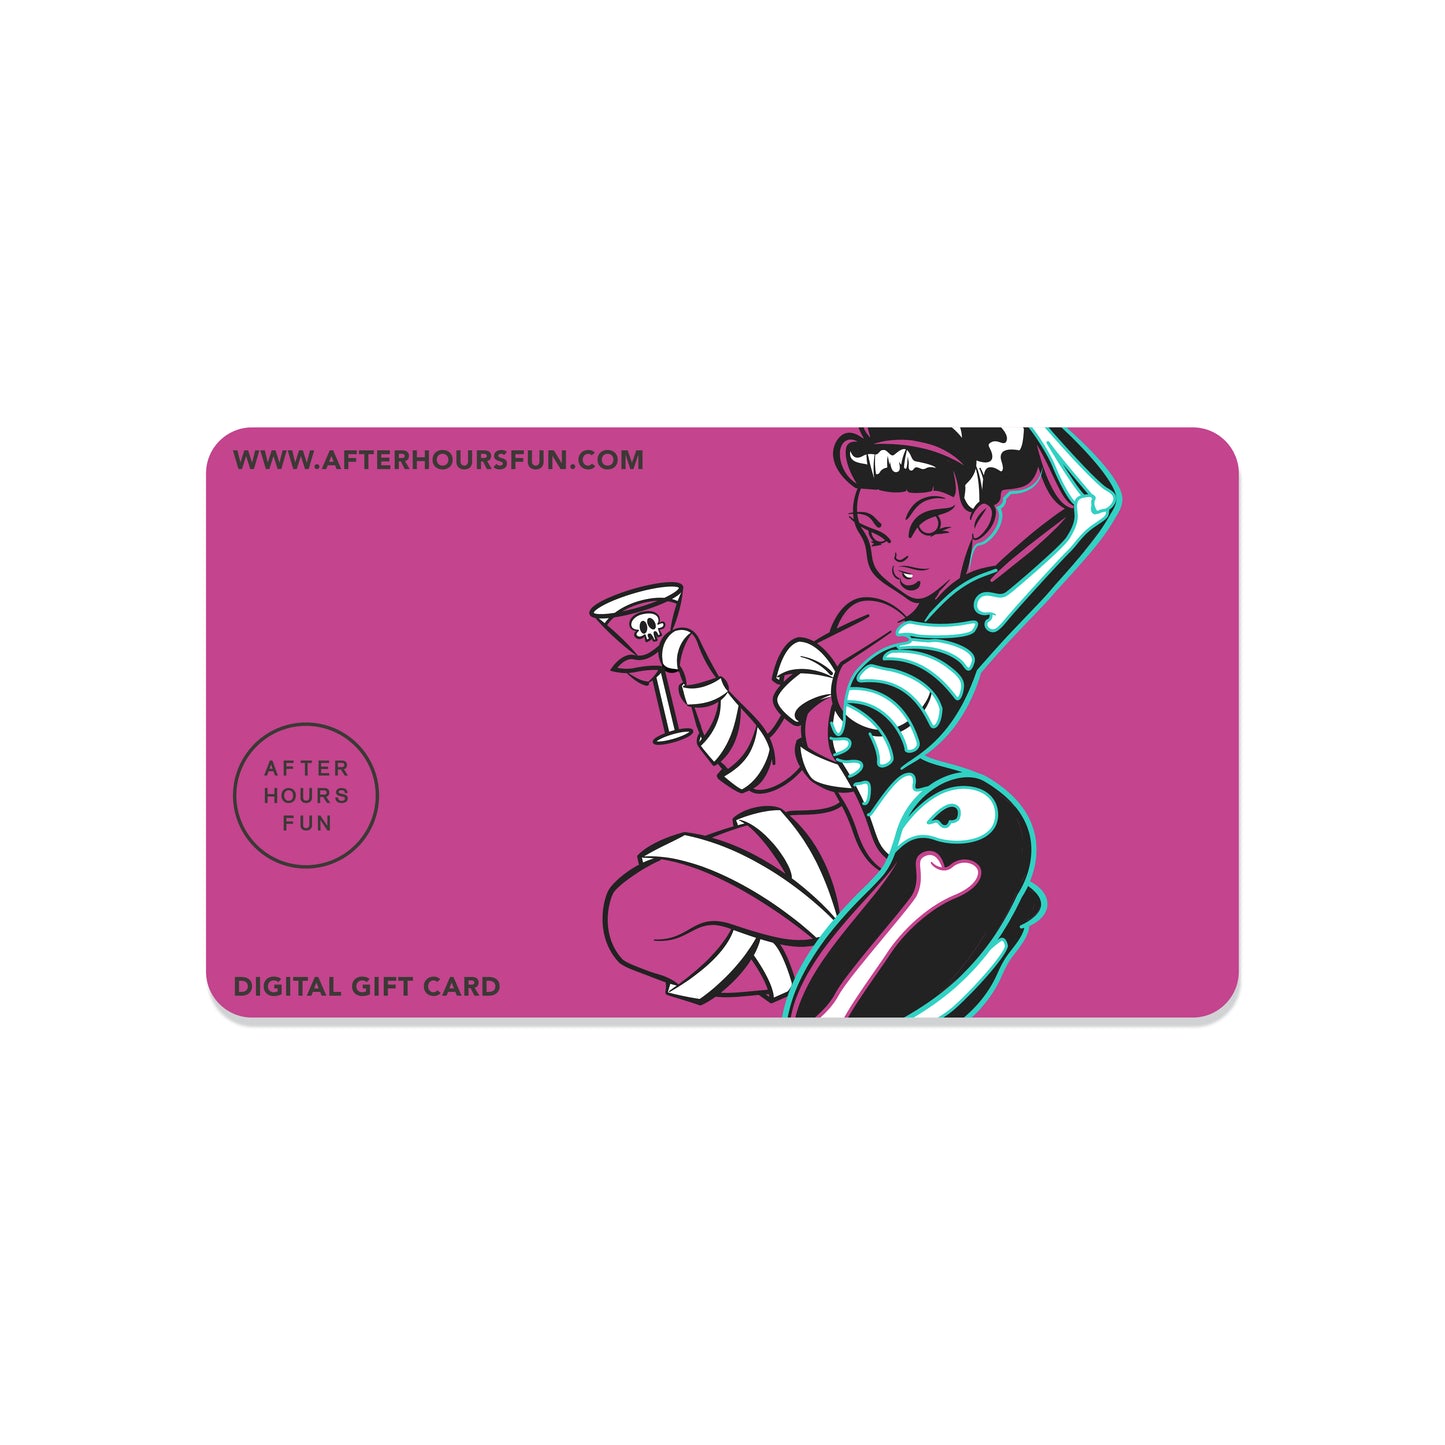 AFTER HOURS FUN Gift Card